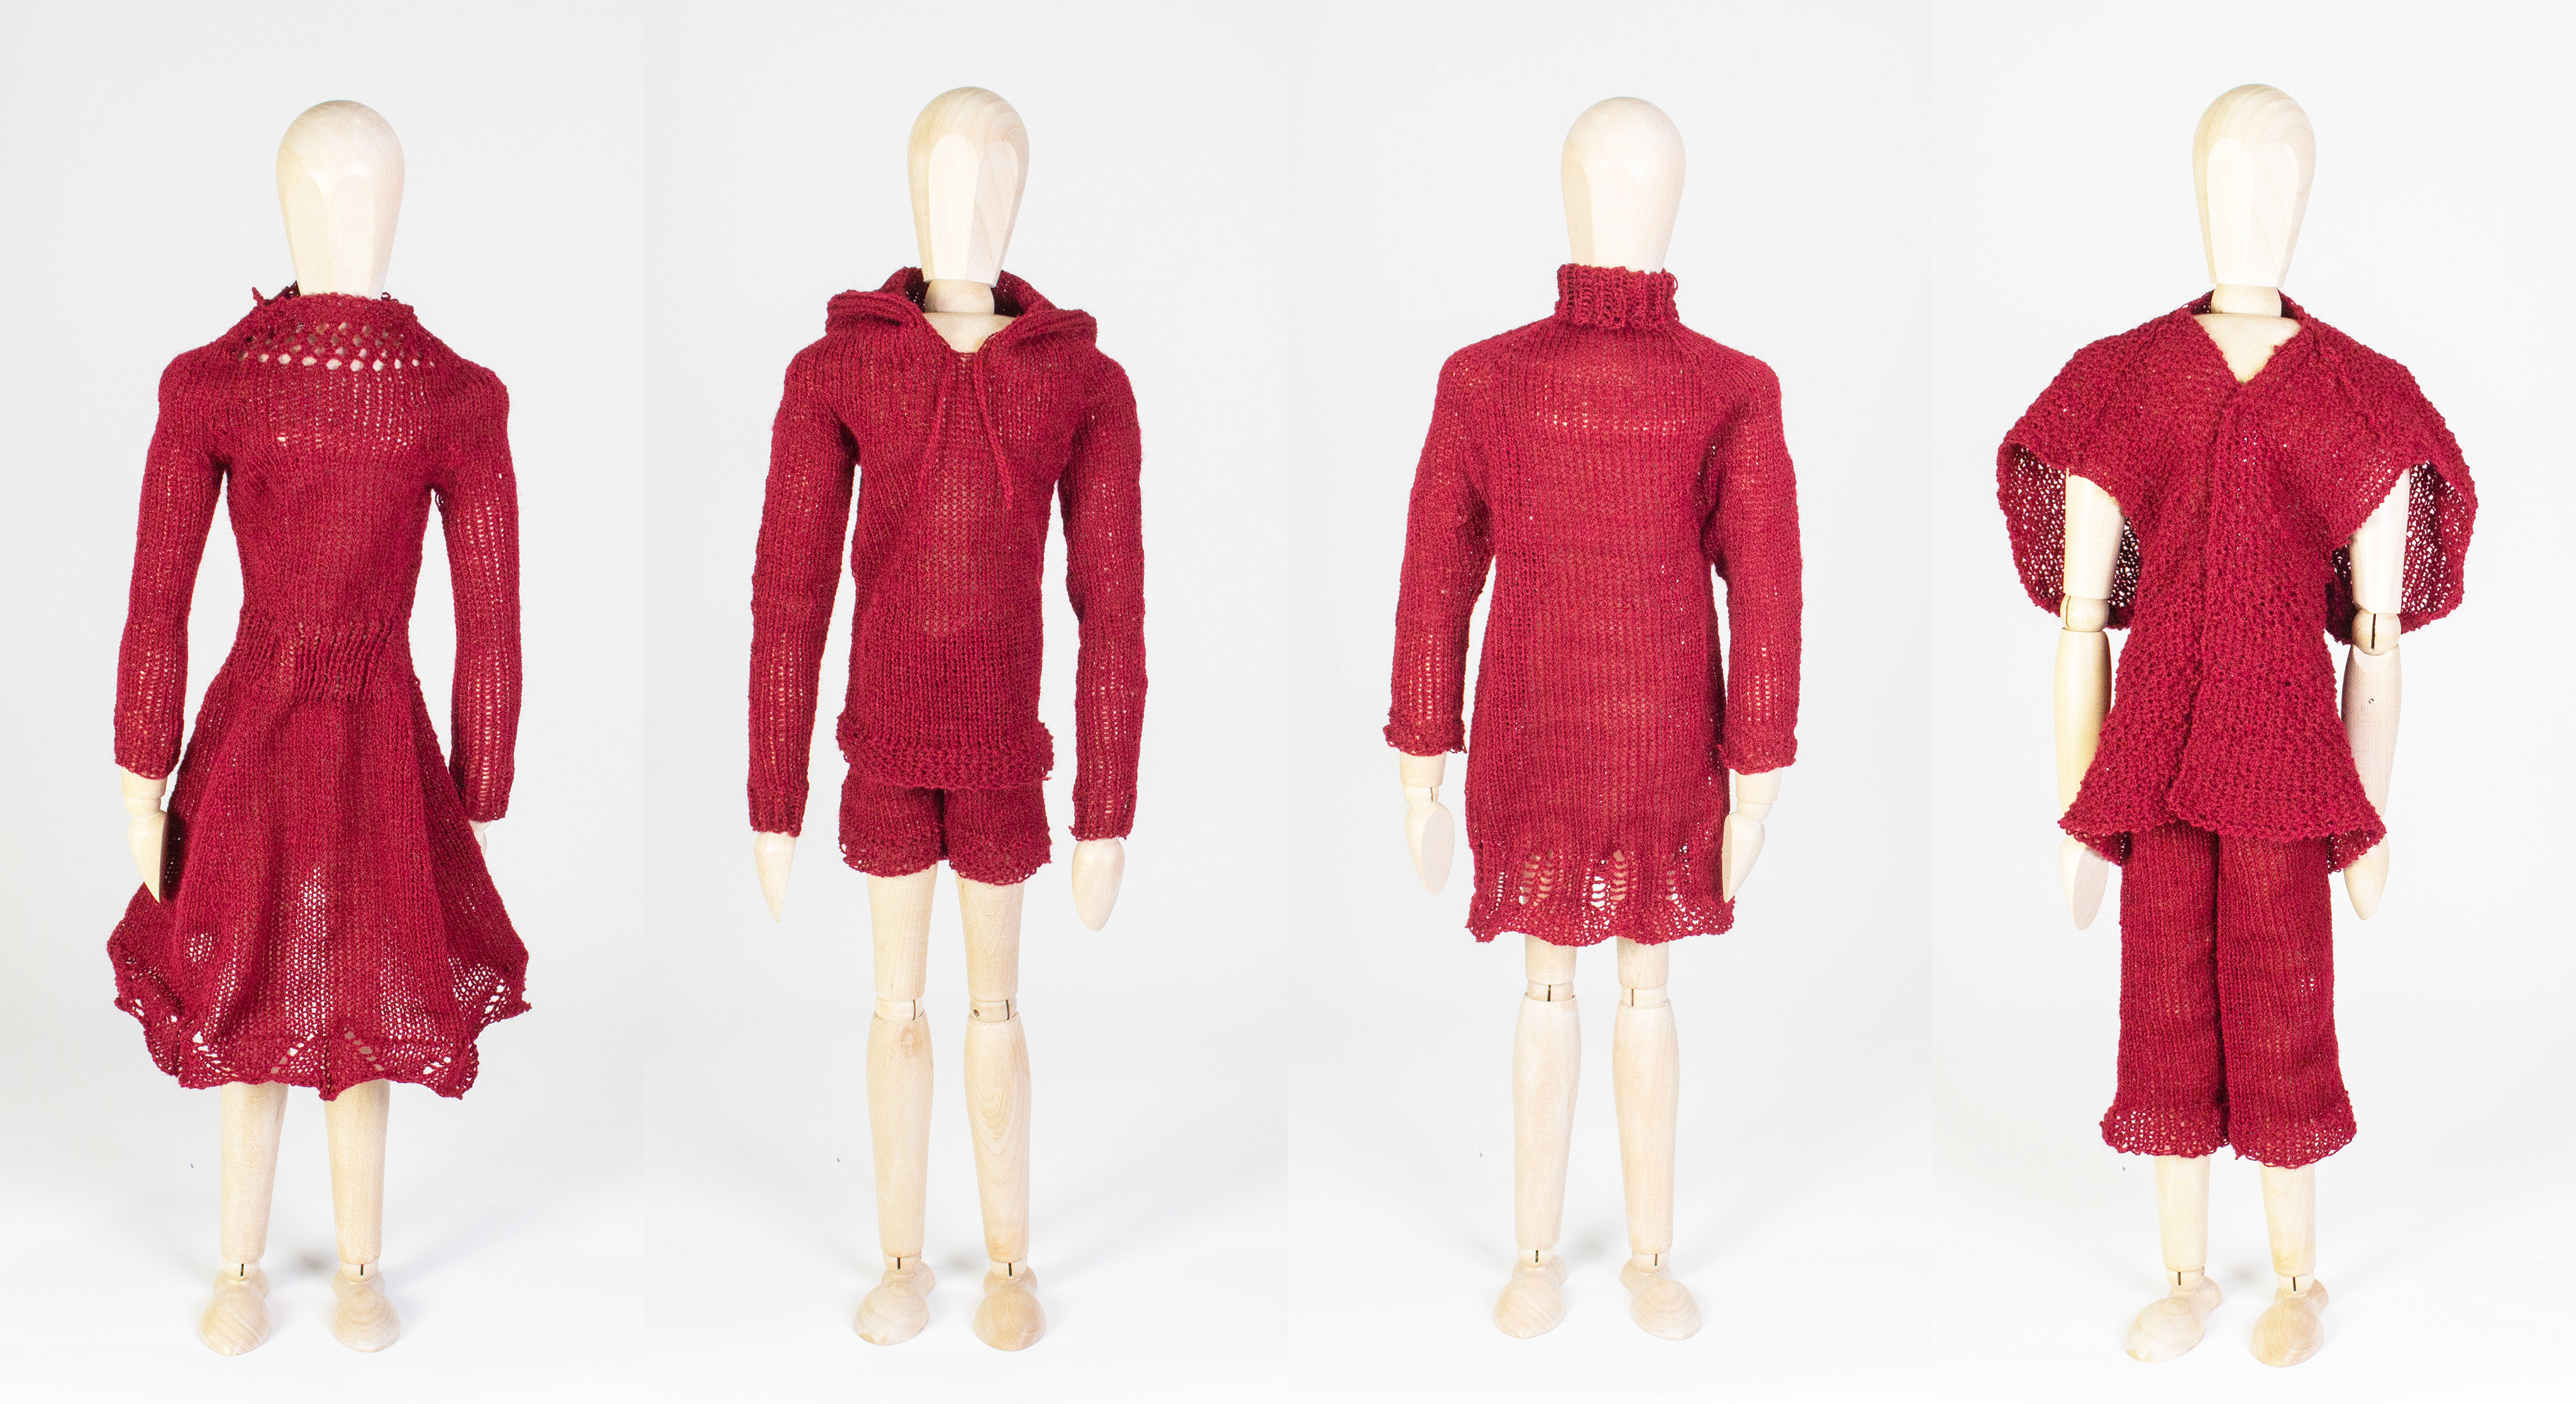 Examples of garments knitted with our system